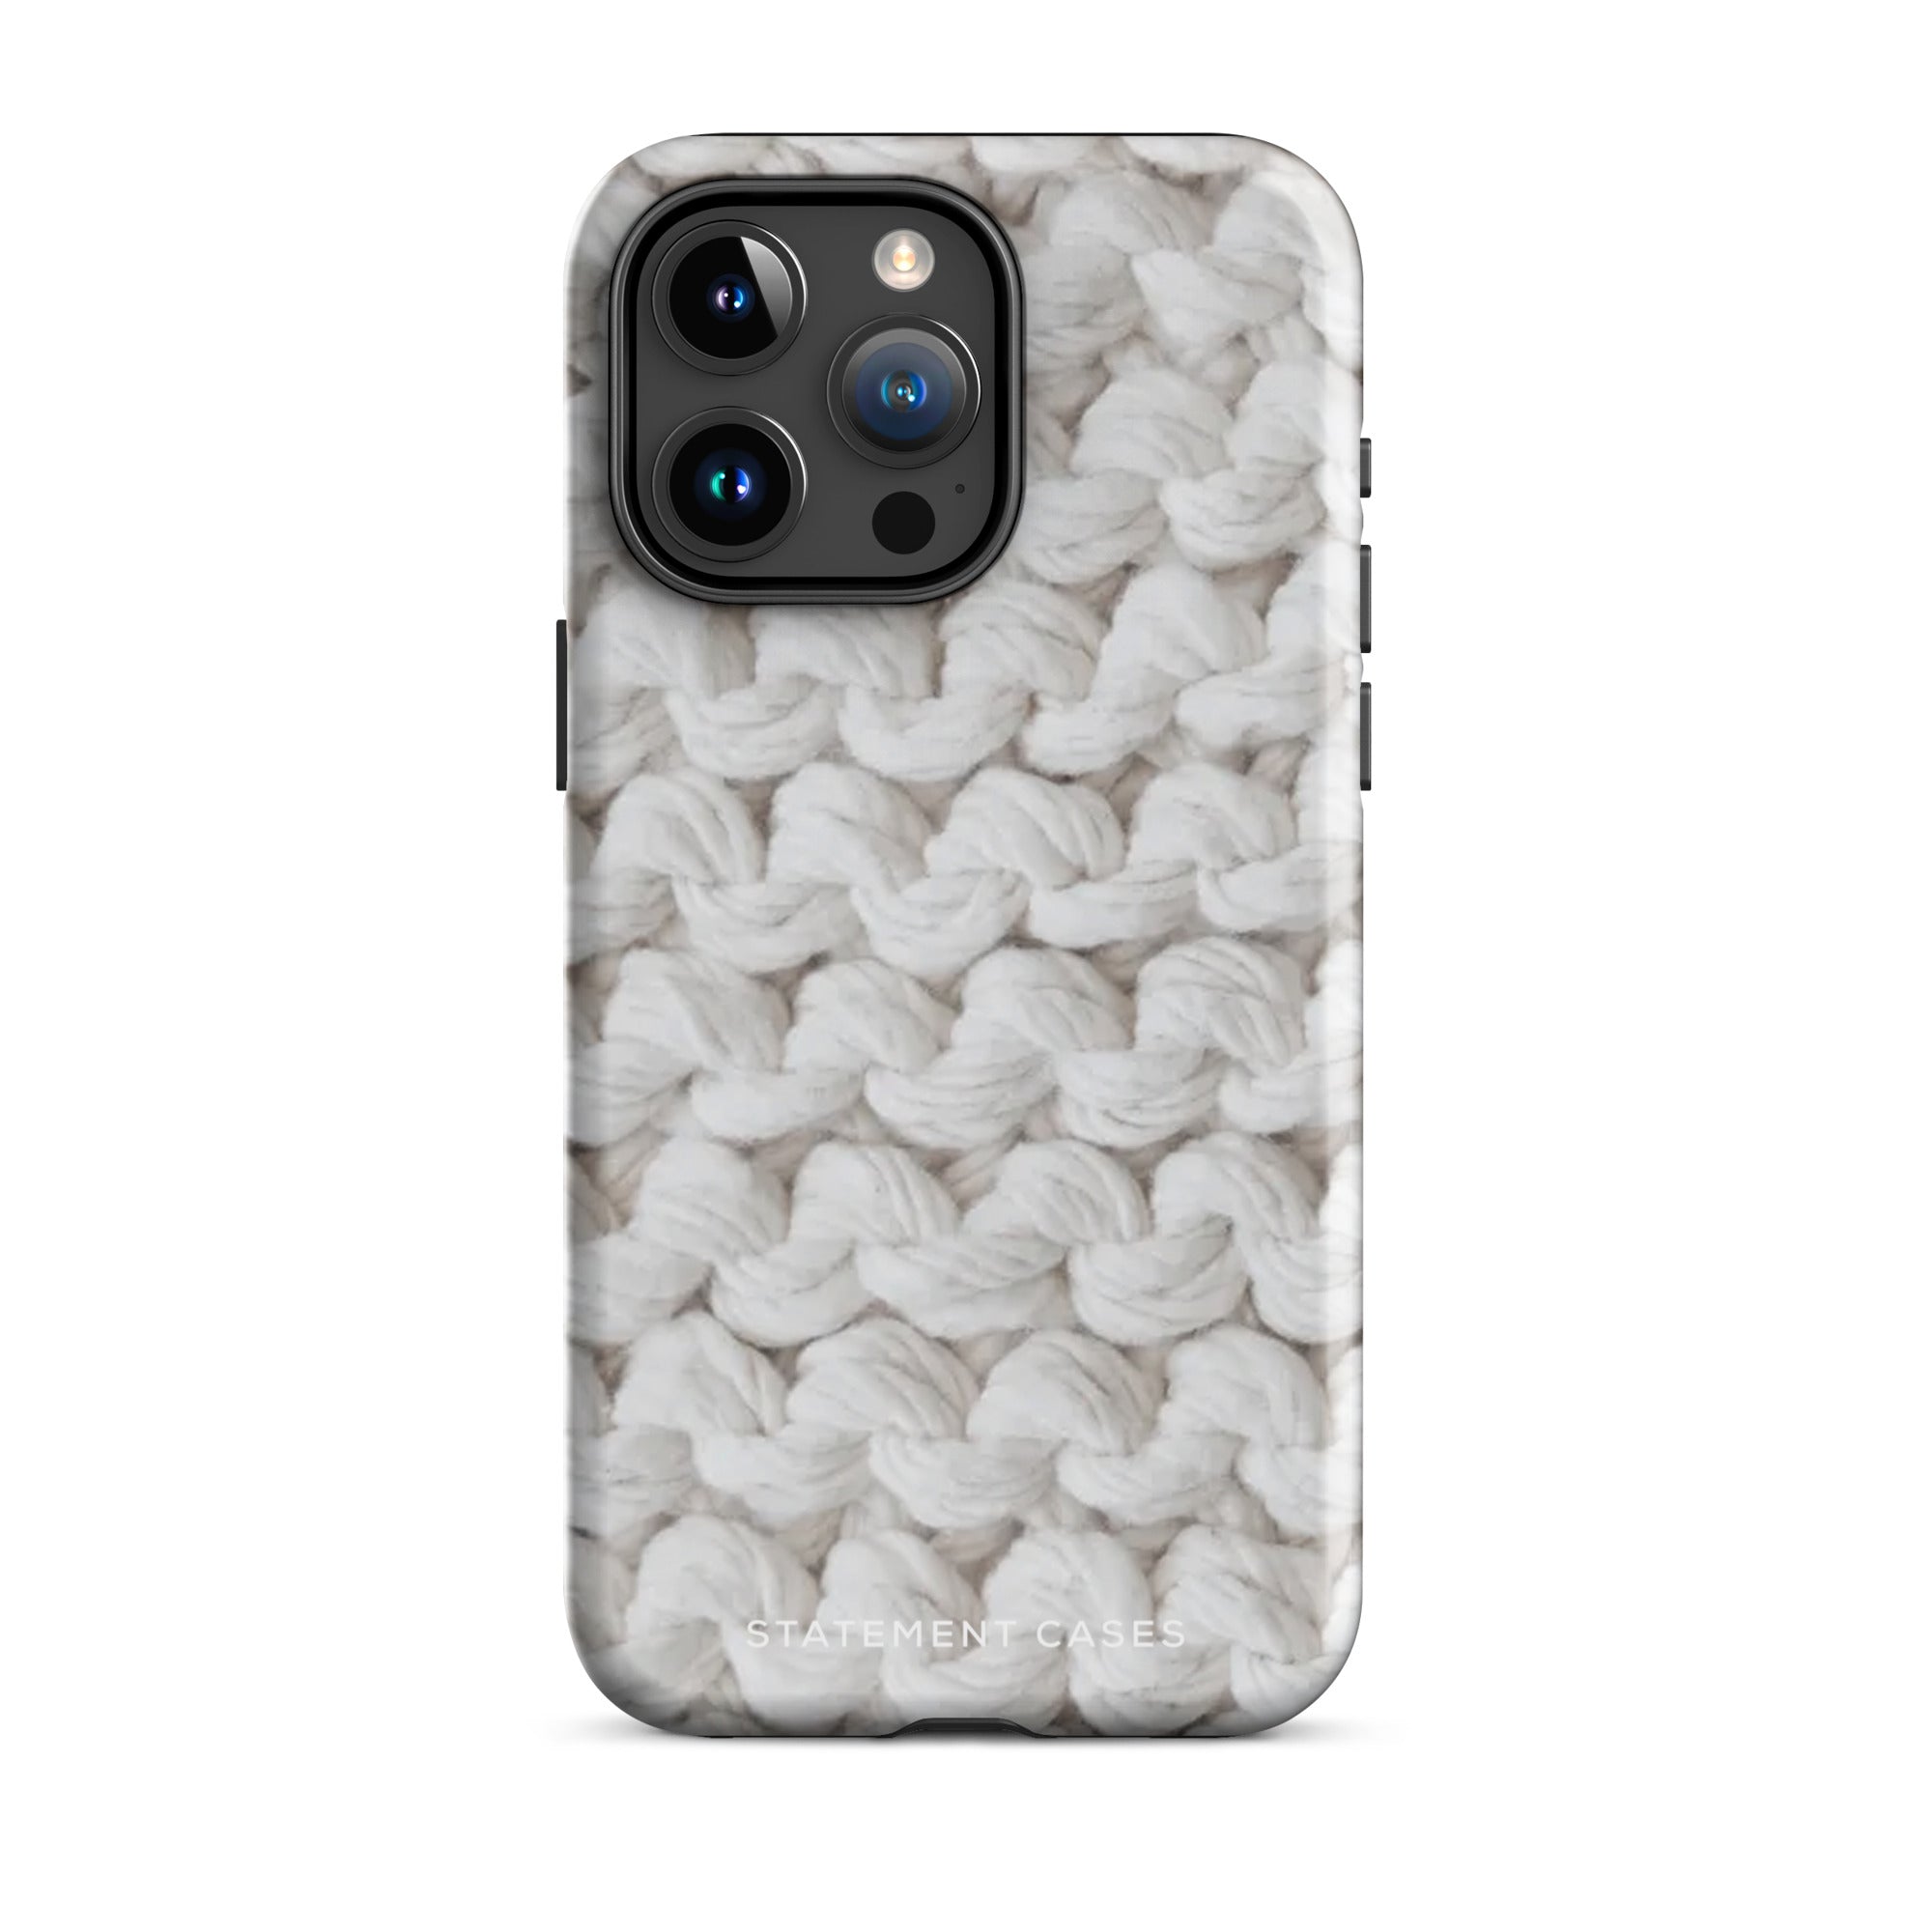 A smartphone featuring a knitted texture design on its case. The pattern resembles closely woven white yarn. The camera lenses are prominent at the top left corner, perfect for the Chunky Comfort for iPhone. The brand name "Statement Cases" is subtly printed at the bottom, ensuring it's both stylish and a protective iPhone case.